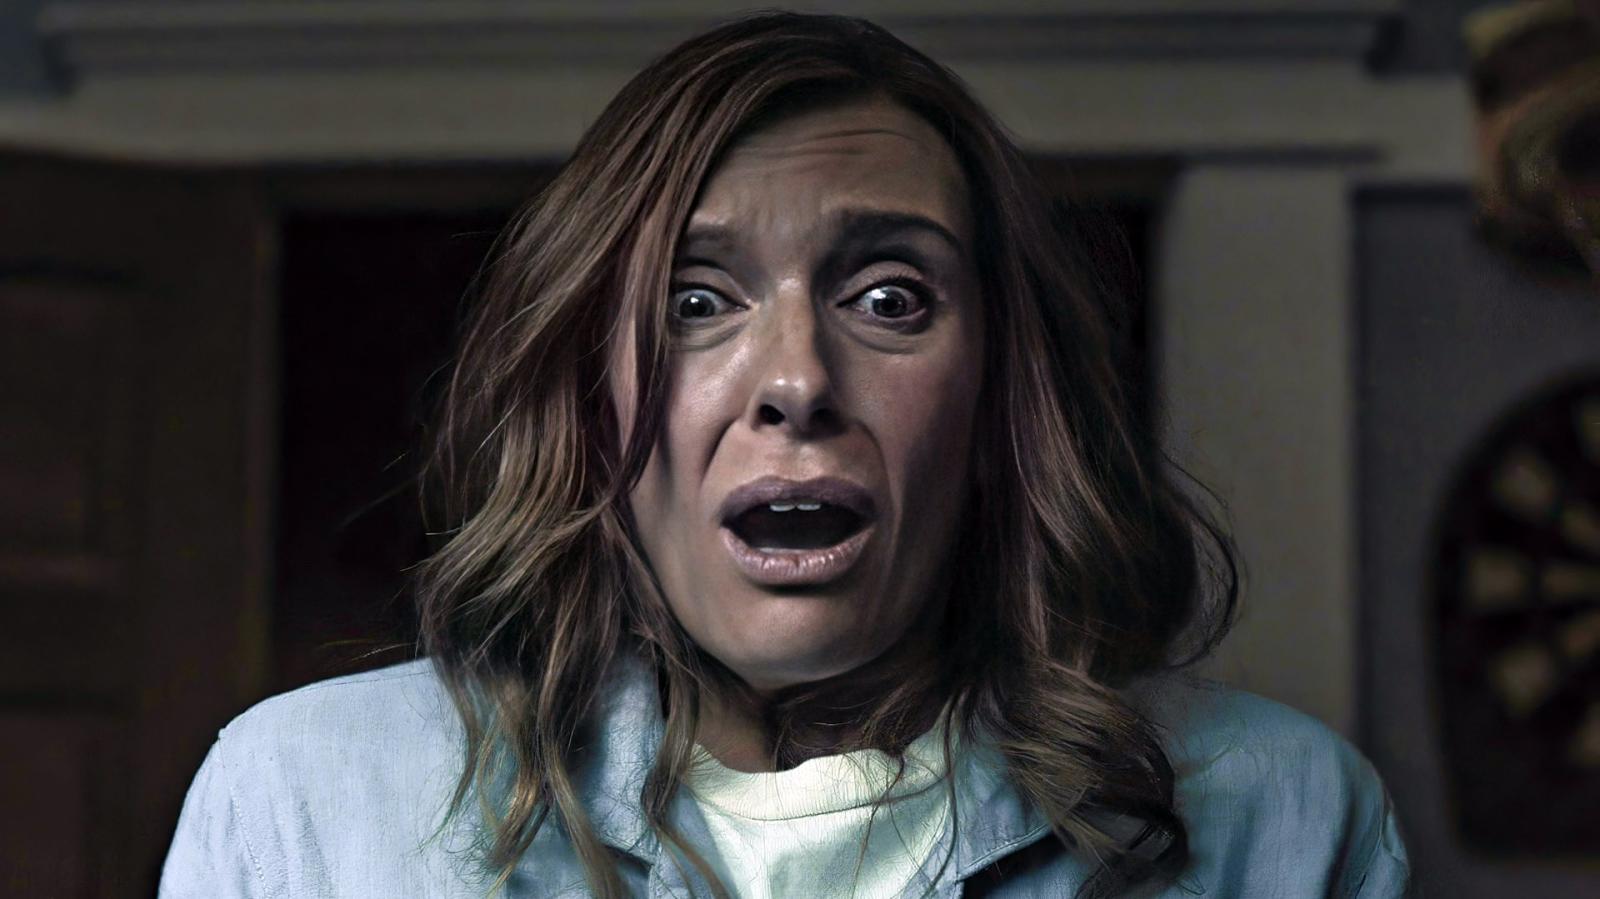 15 Best Movies With Jump Scares to Watch This Halloween - image 6